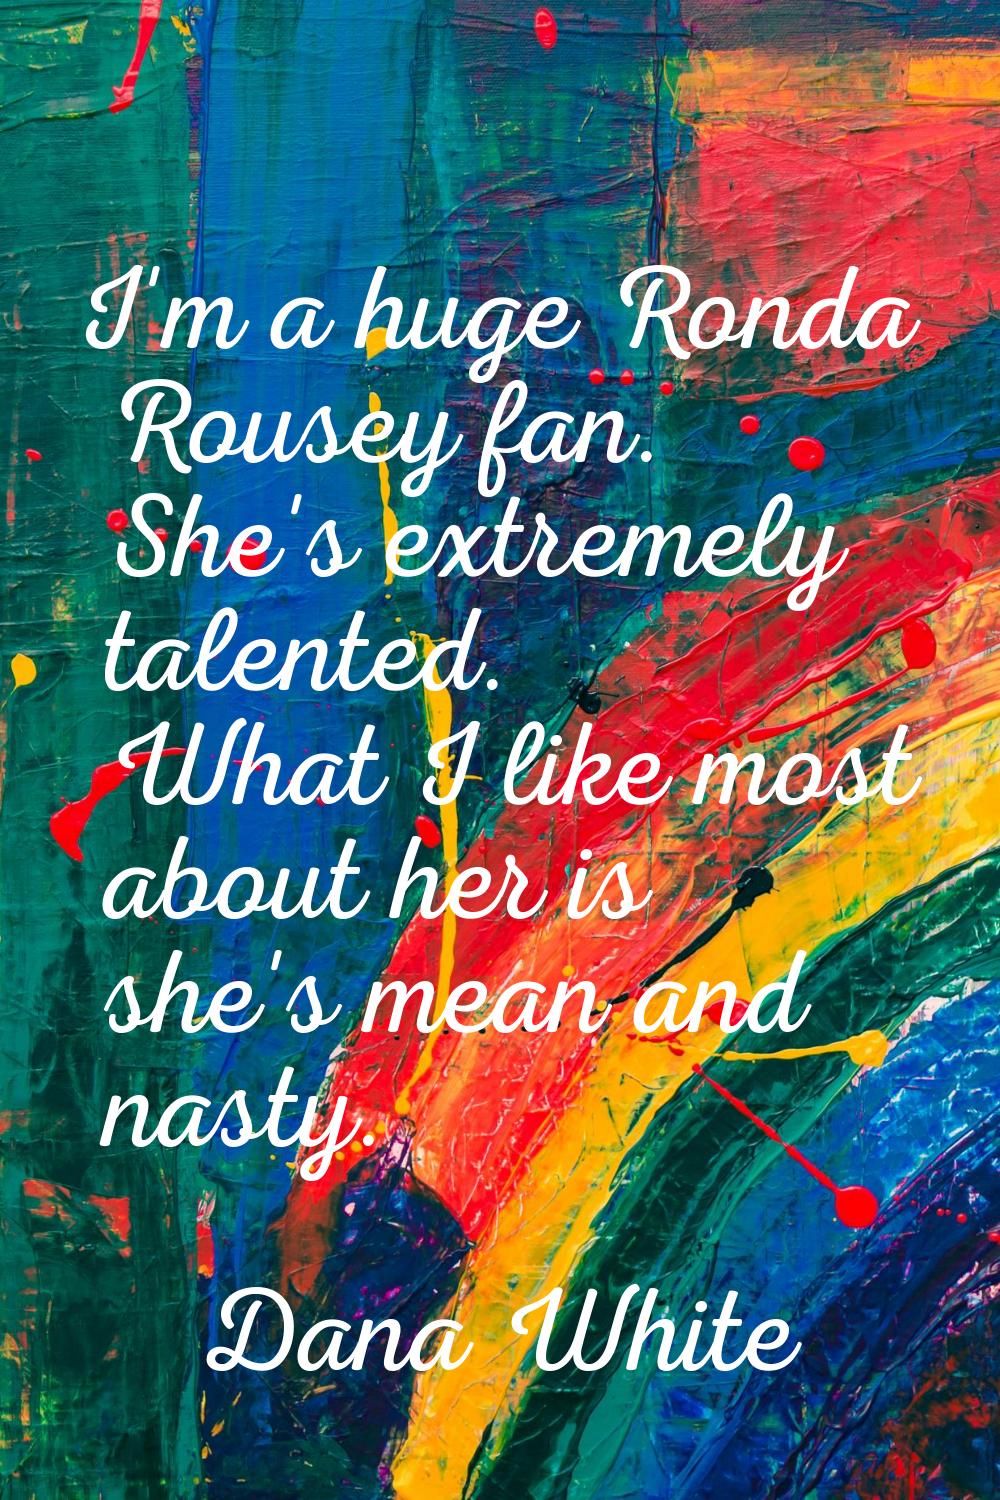 I'm a huge Ronda Rousey fan. She's extremely talented. What I like most about her is she's mean and